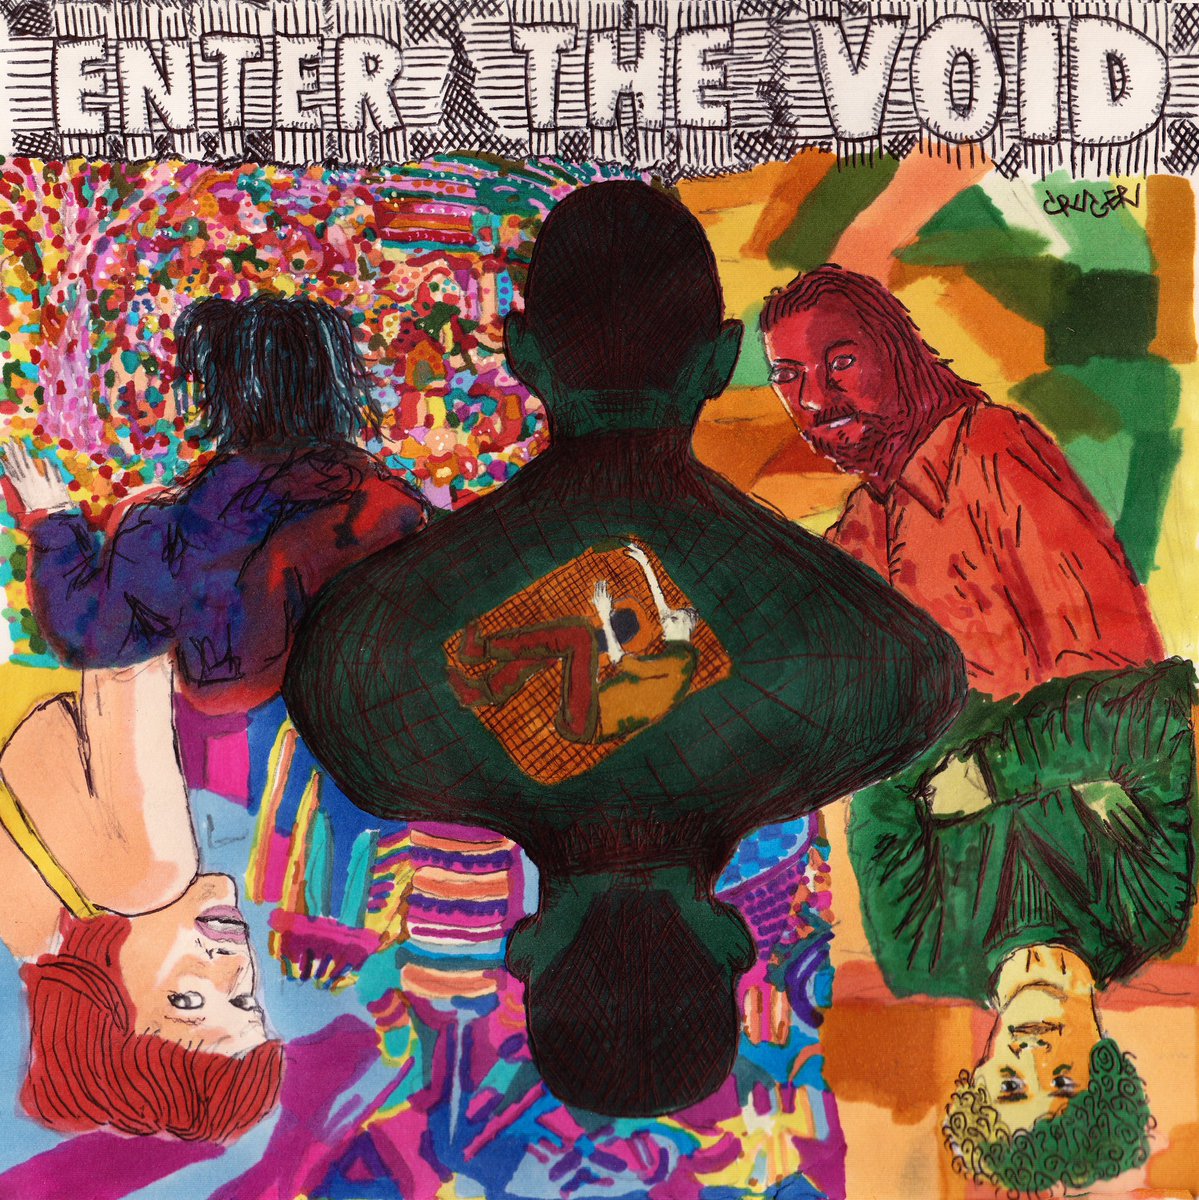 7. Enter The Void (2009)